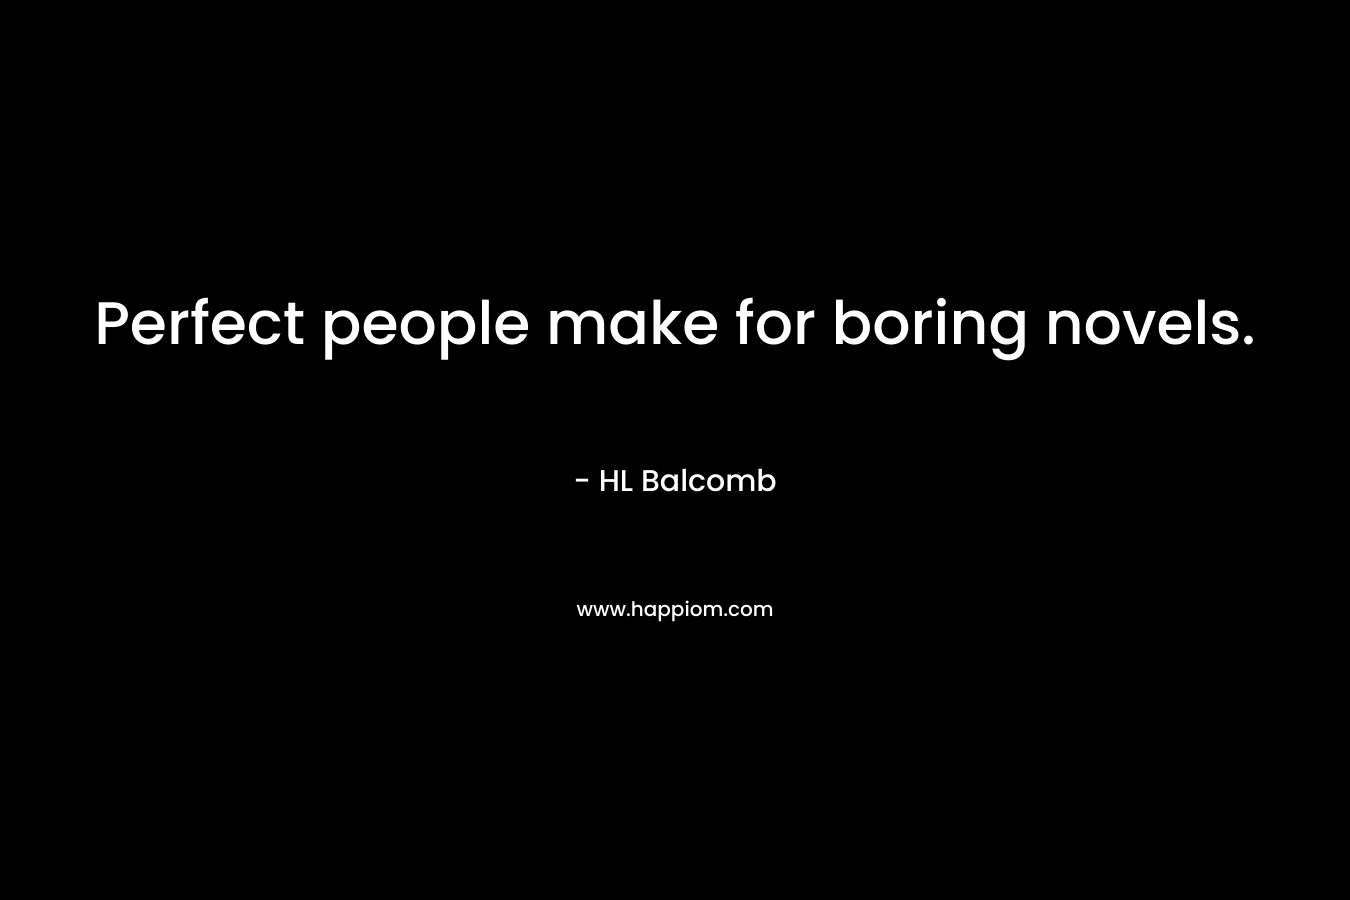 Perfect people make for boring novels.